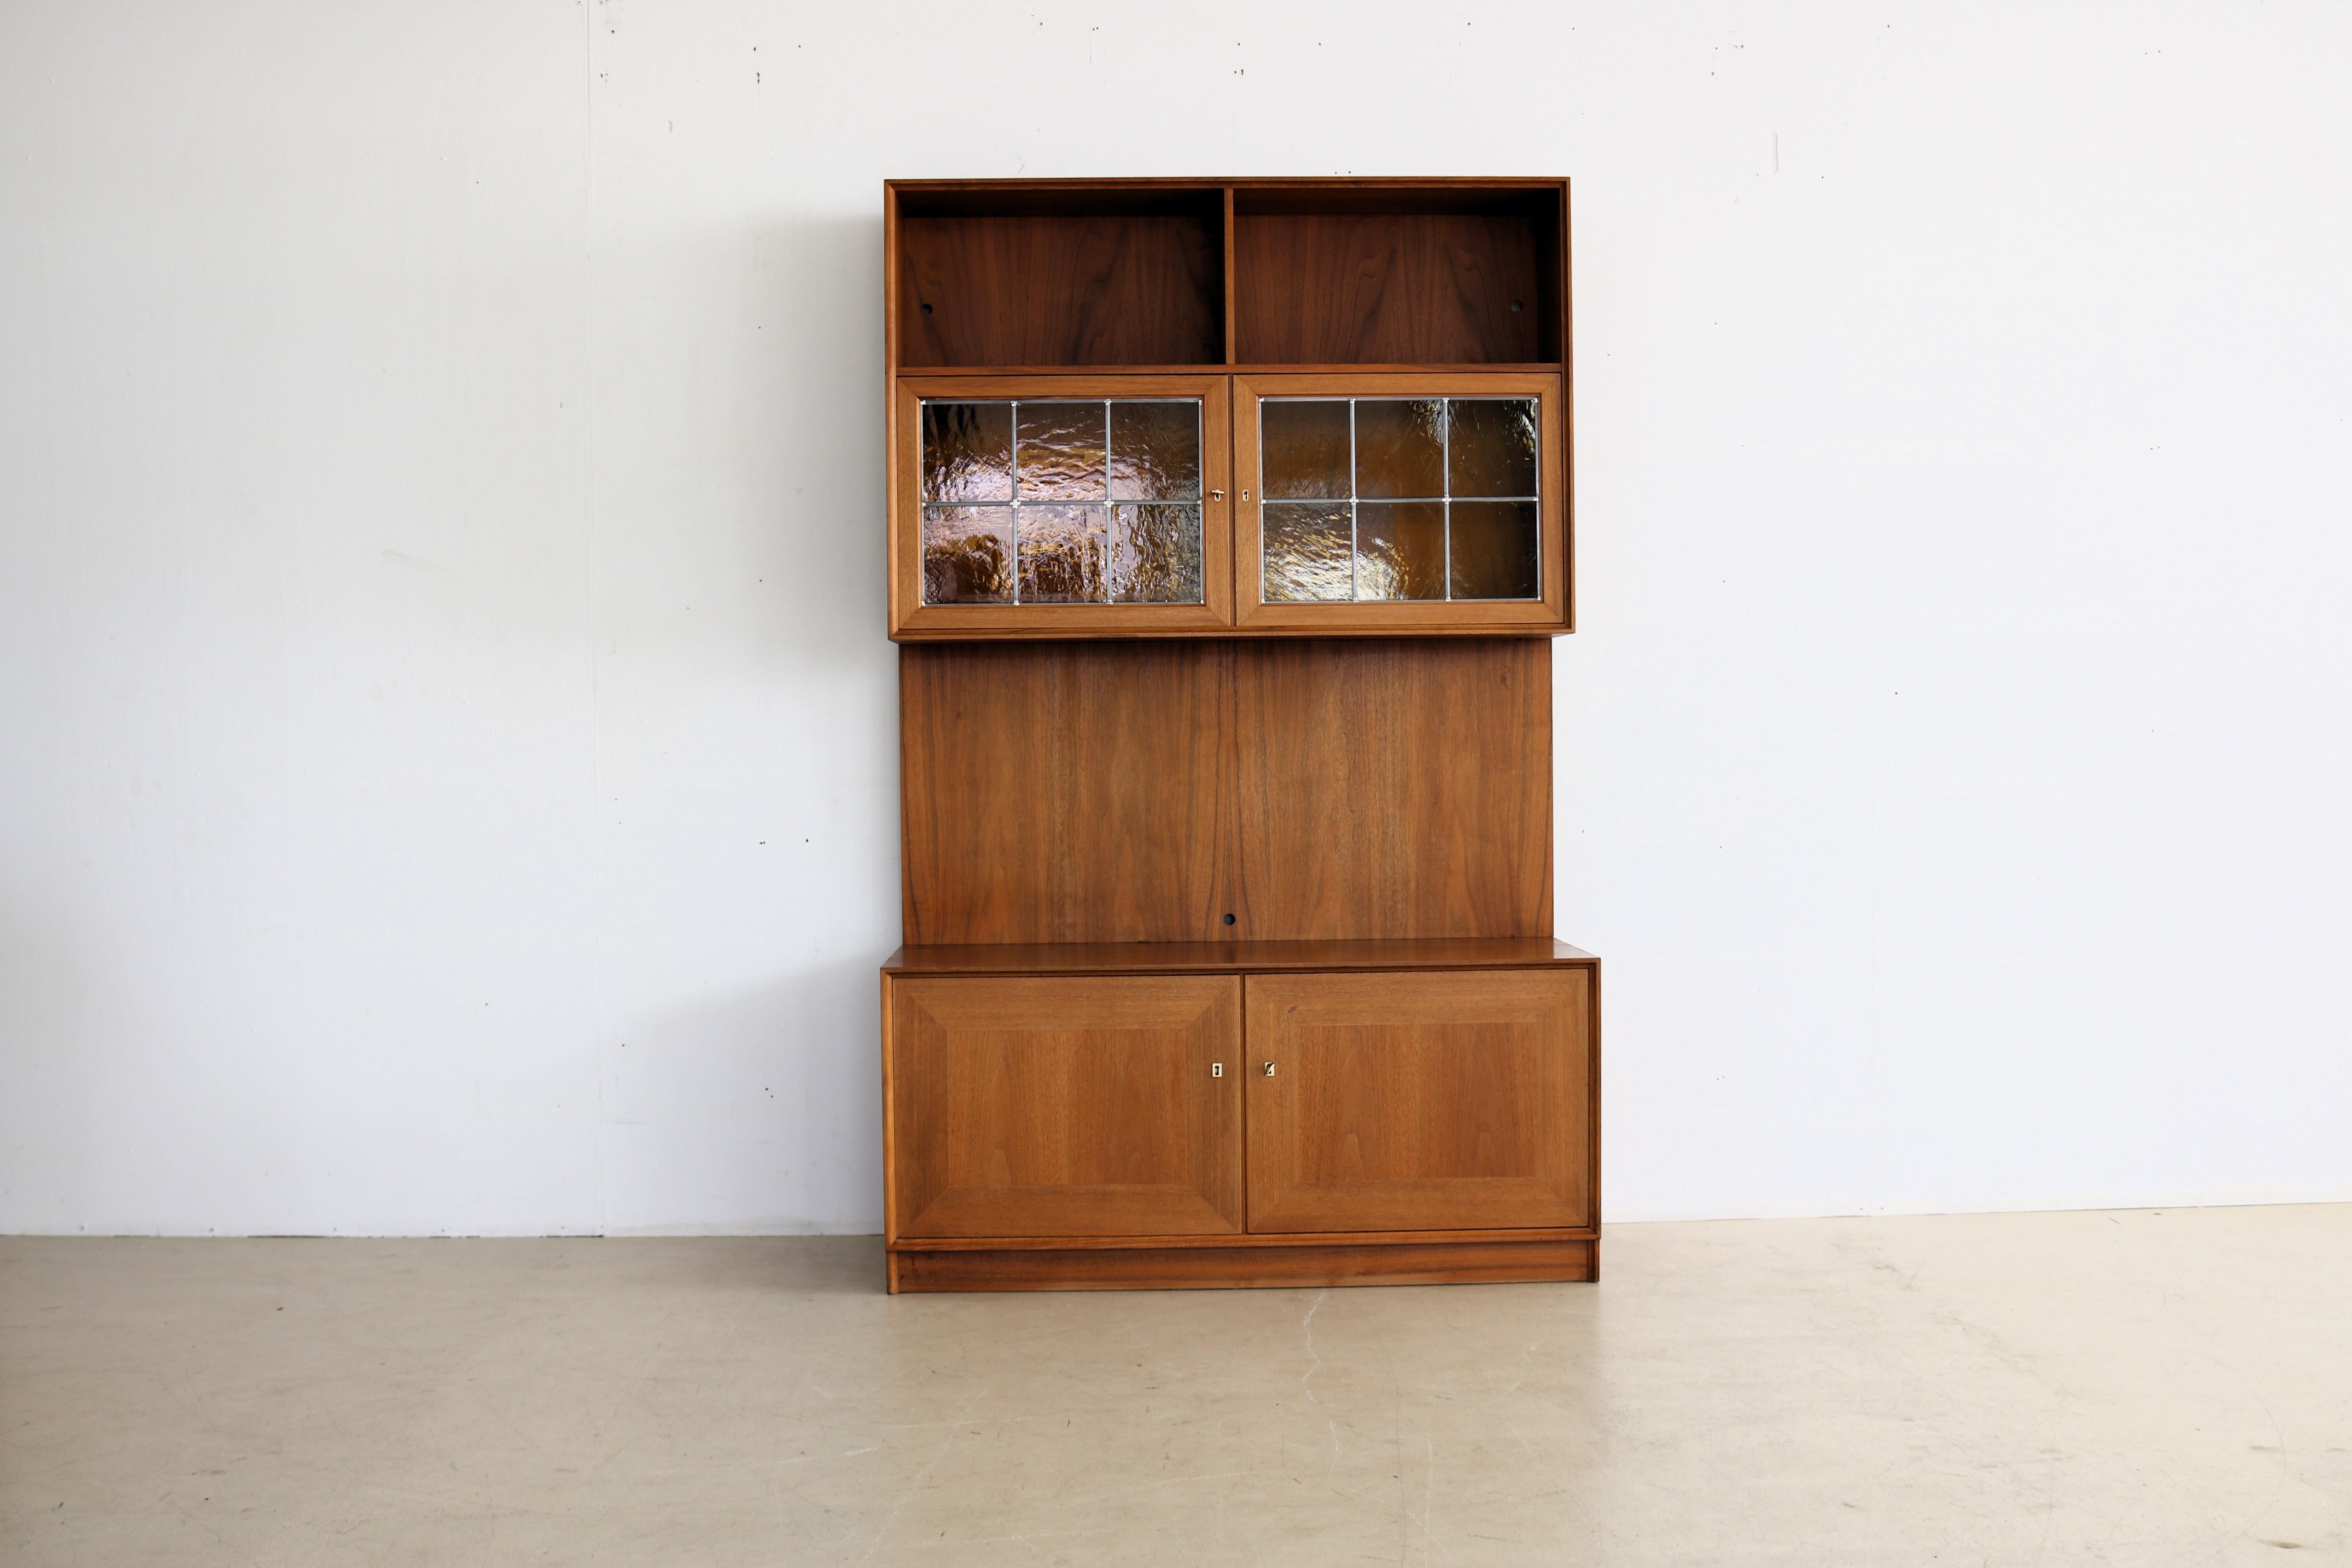 vintage wall unit standing wall system 60s Swedish

1960s wall unit from Sweden. 